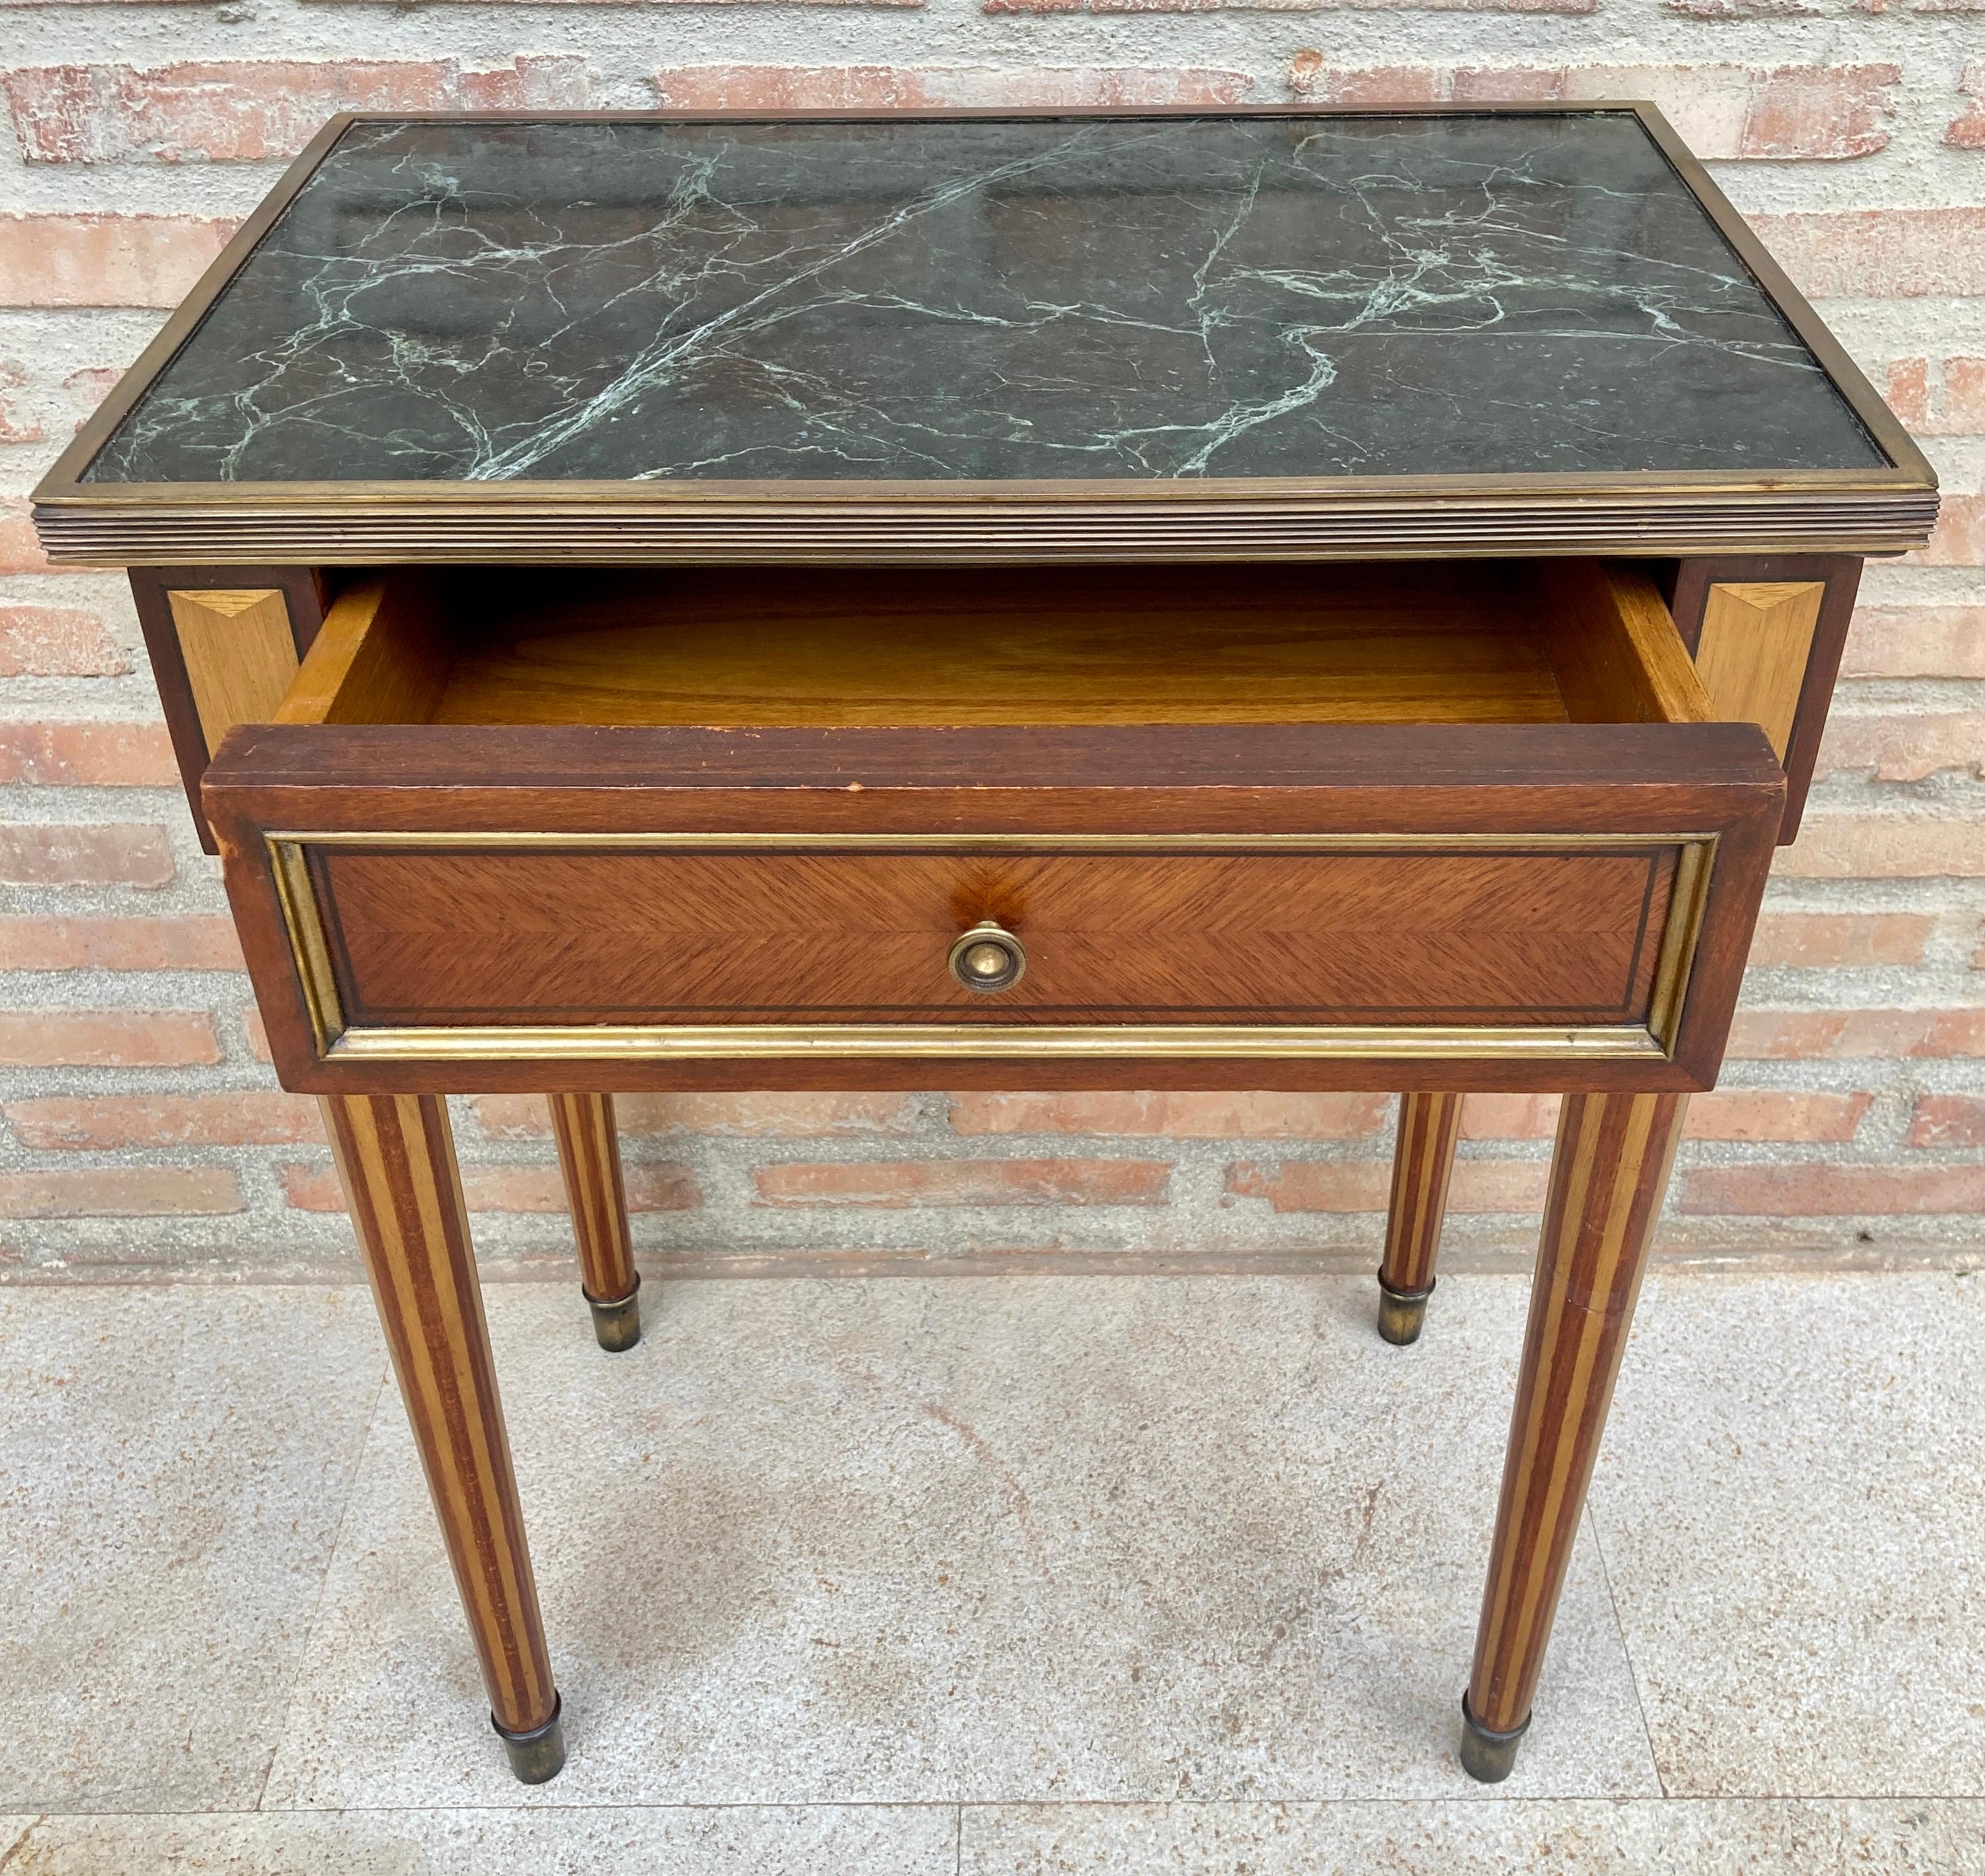 20th Century Neoclassical Mahogany Side Table With Fluted Legs And Green Marble, 1920s For Sale